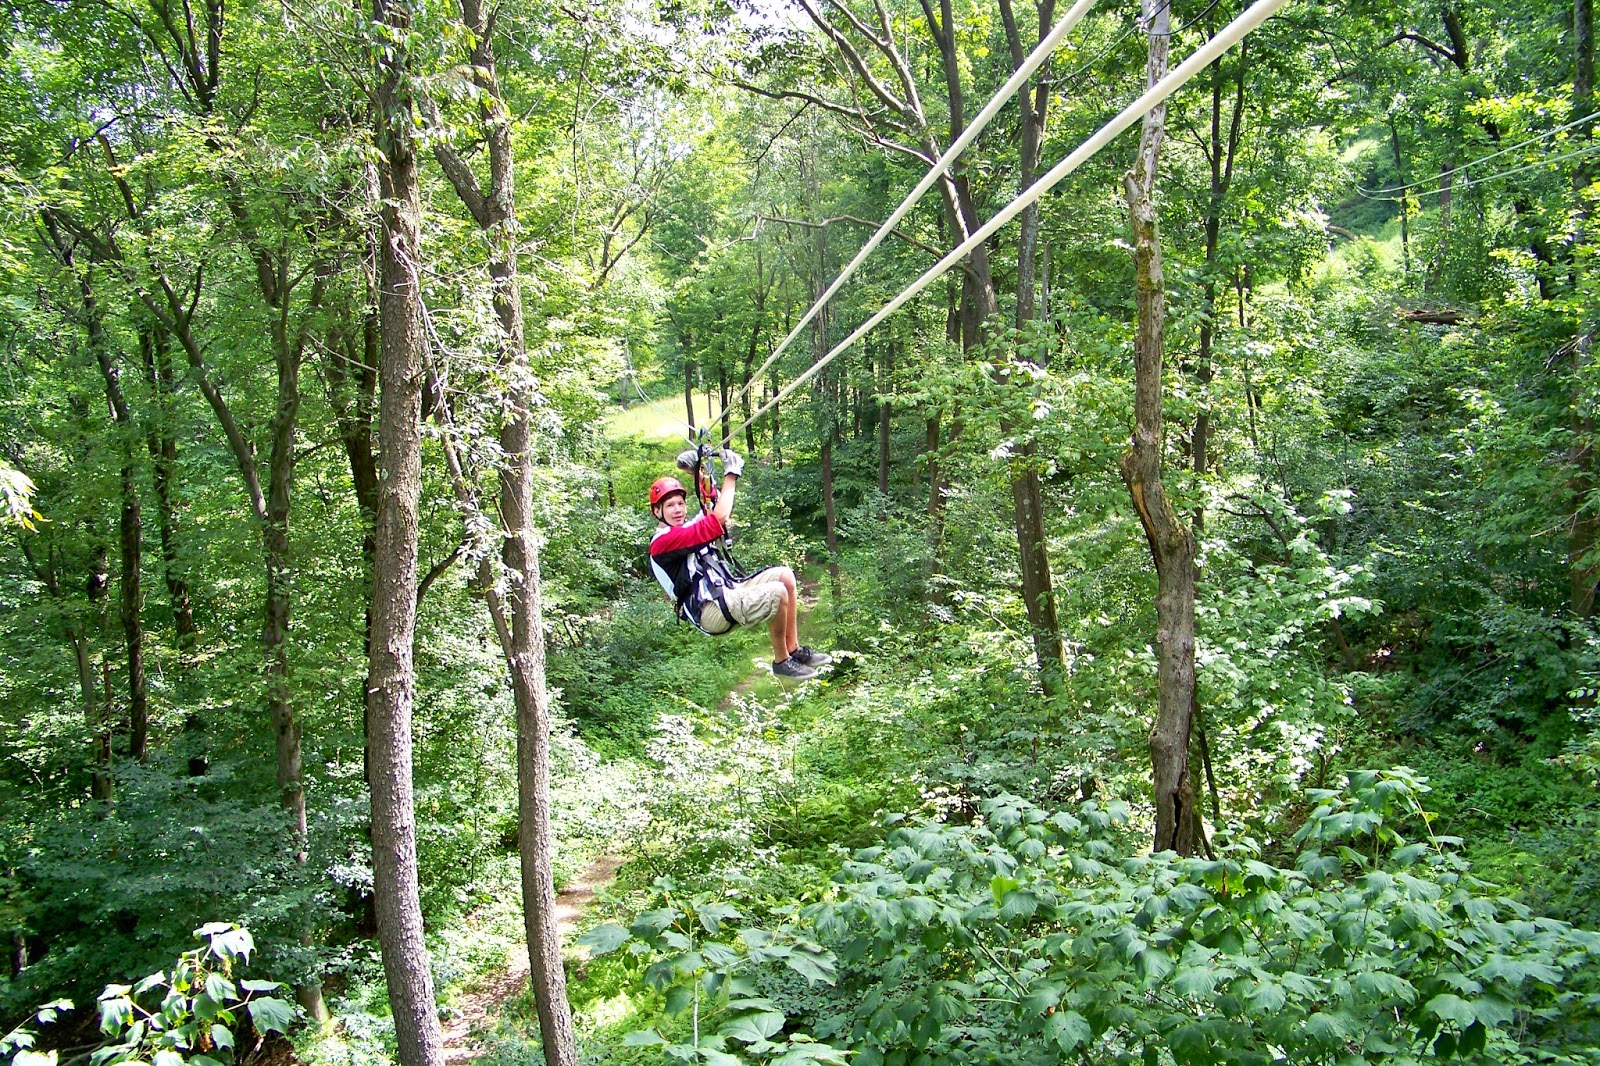 A visit to a travel agency is nothing to write home about, but r. Dave Kathy 2011 2021 Screaming Hawk Laurel Ridge Canopy Tour Zip Lines August 2013